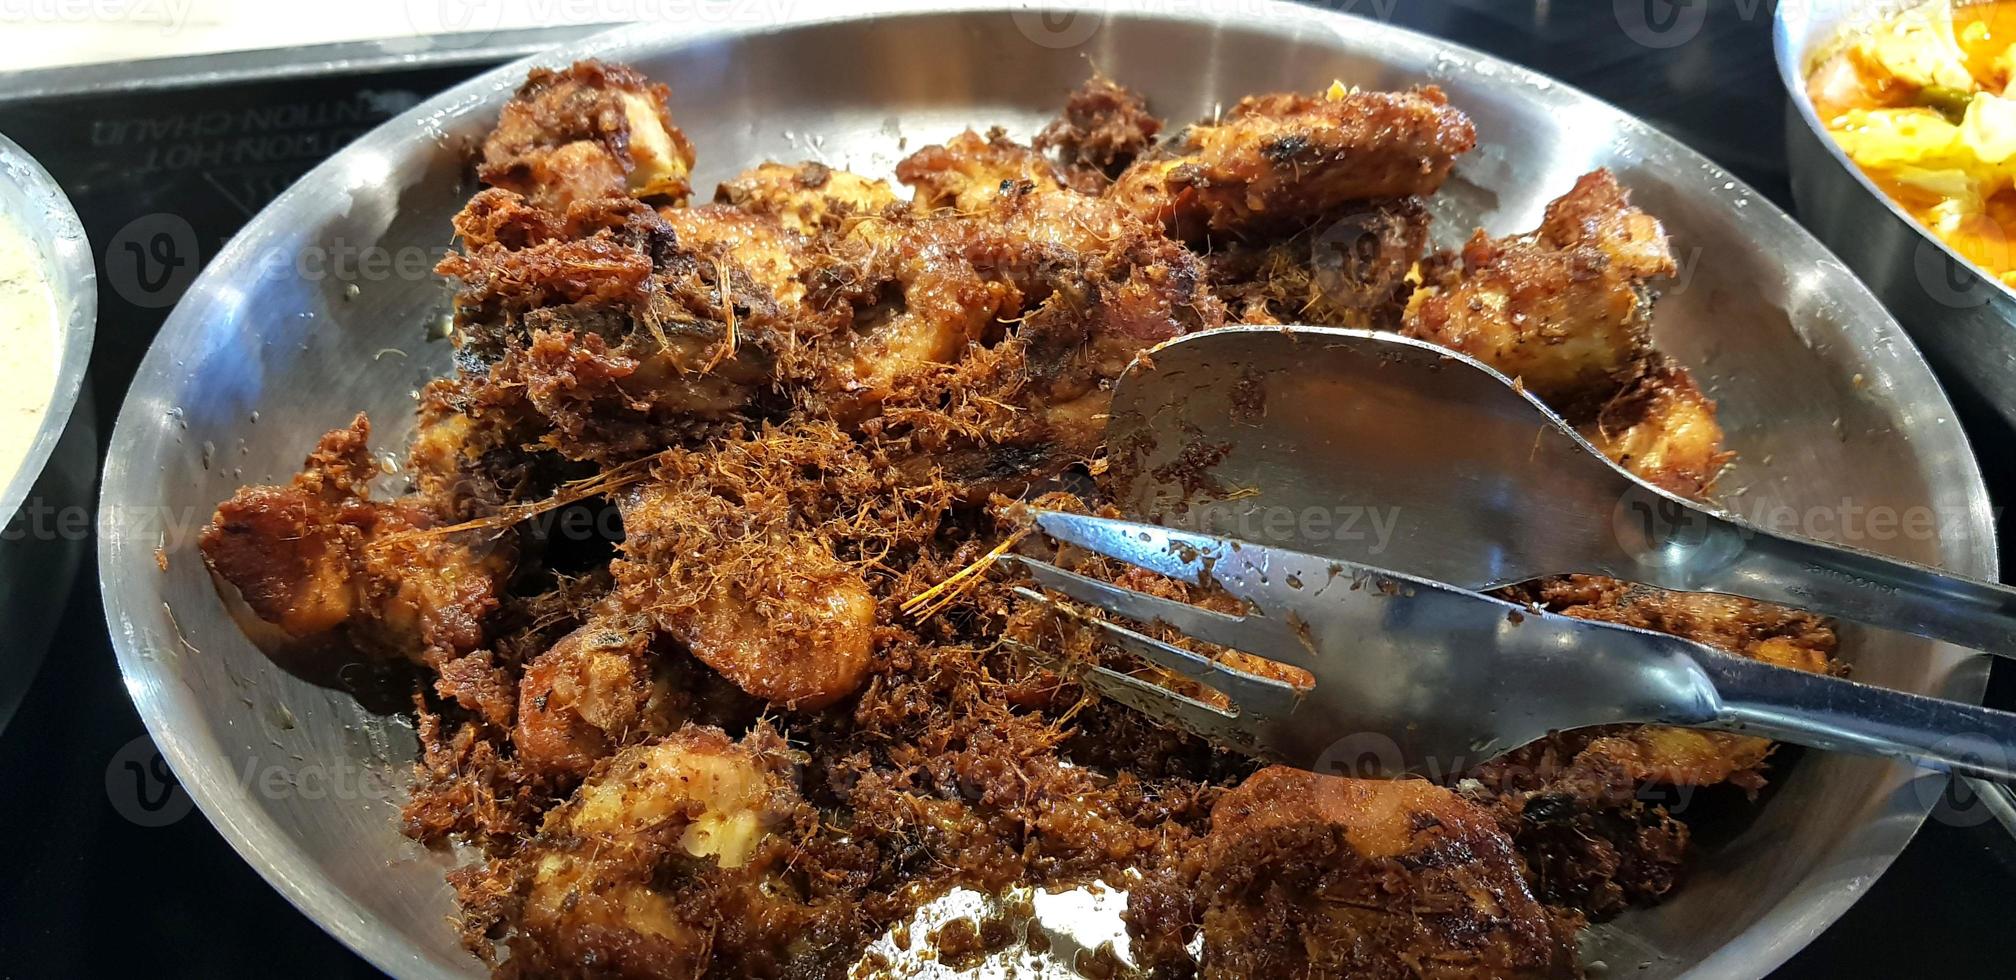 Ayam goreng rempah or traditional Javanese fried chicken, cooked on frying pan photo